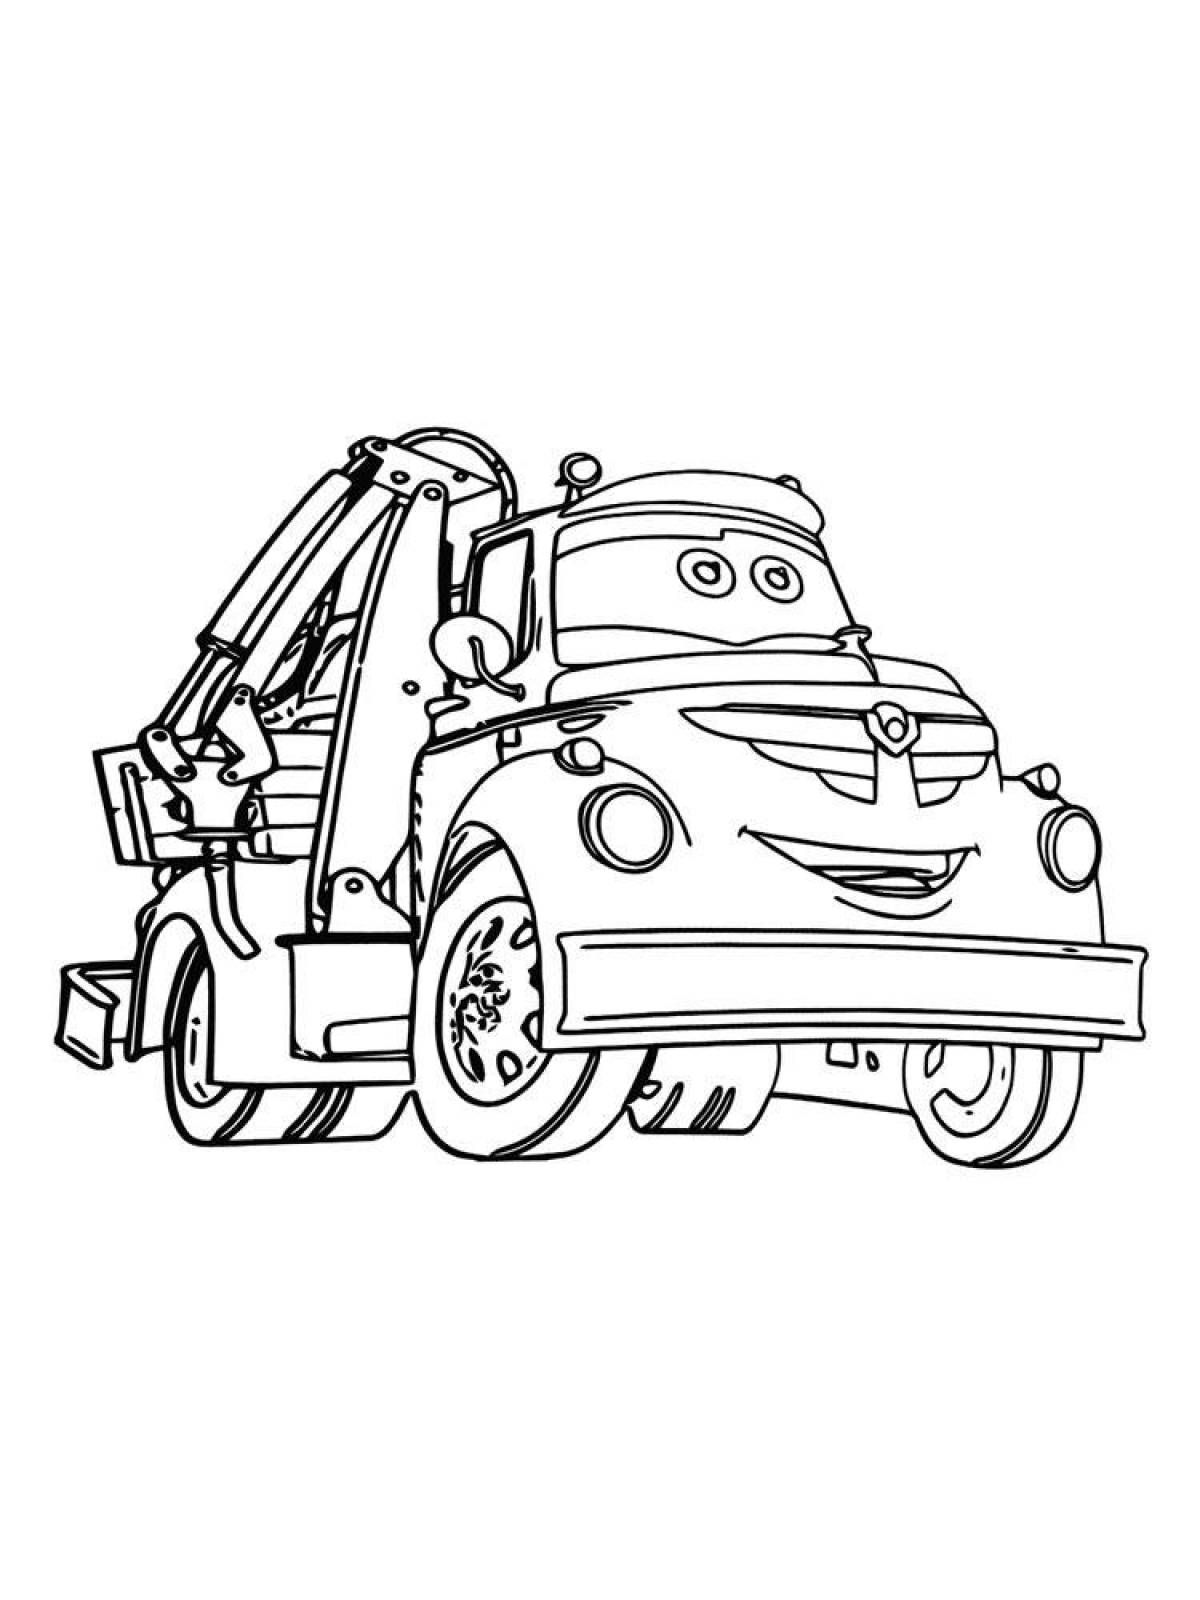 Exquisite tow truck coloring page